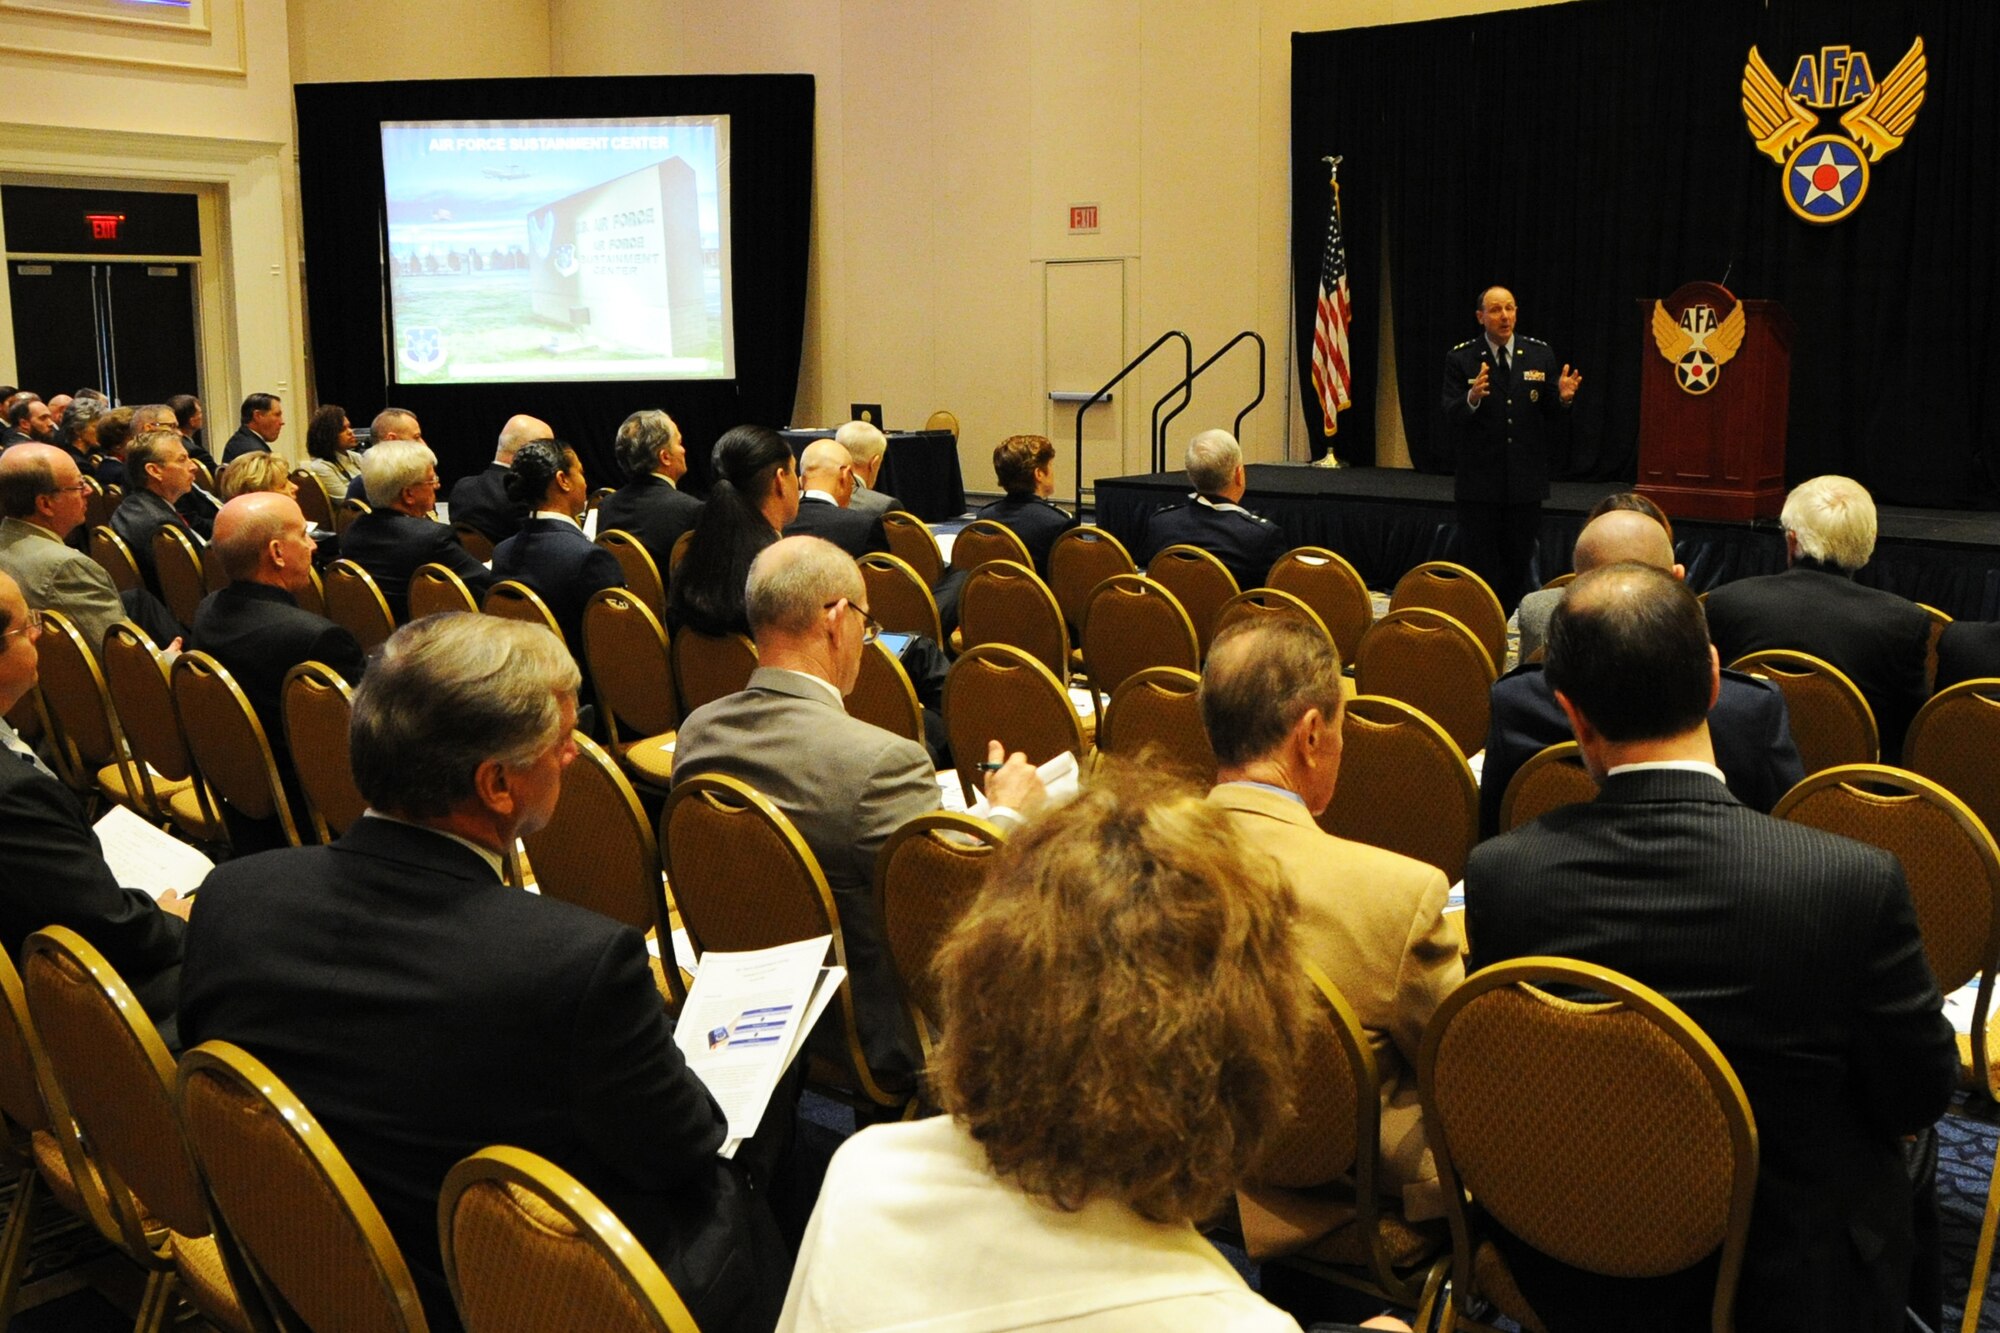 Attendees listen to a presentation from Lt.Gen. Bruce Litchfield during the Air Force Association's 2014 Air and Space Conference Sept. 15, 2014, in Washington, D.C. As the Air Force Sustainment Center commander, he ensures the Center provides operational planning and execution of Air Force Supply Chain Management and Depot Maintenance for a wide range of aircraft, engines, missiles, and component items in support of Air Force Materiel Command missions. (U.S. Air Force photo/Staff Sgt. Matt Davis)